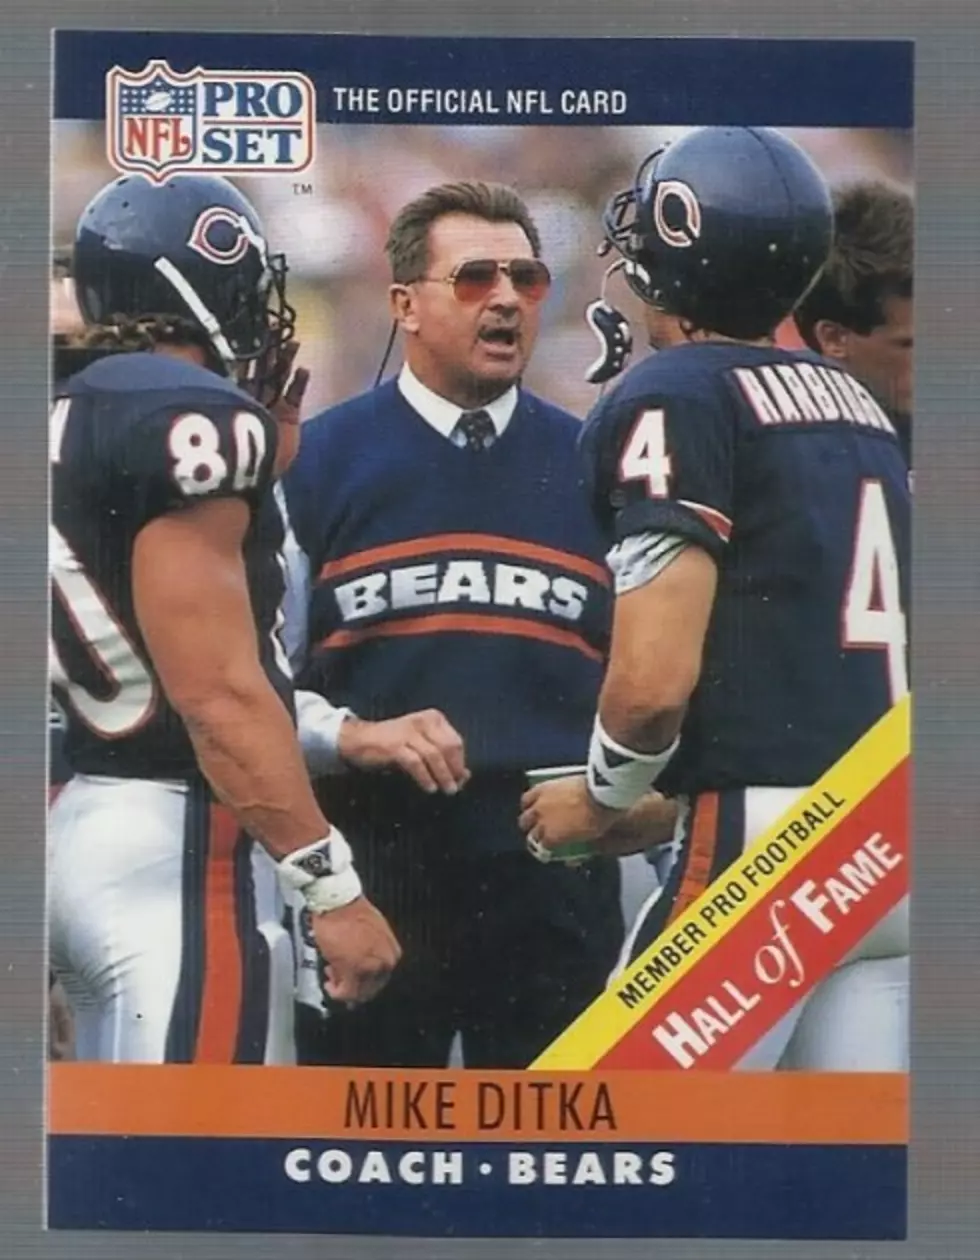 NFL Hall of Famer Mike Ditka says &#8220;No!&#8221; to Kids Playing Football